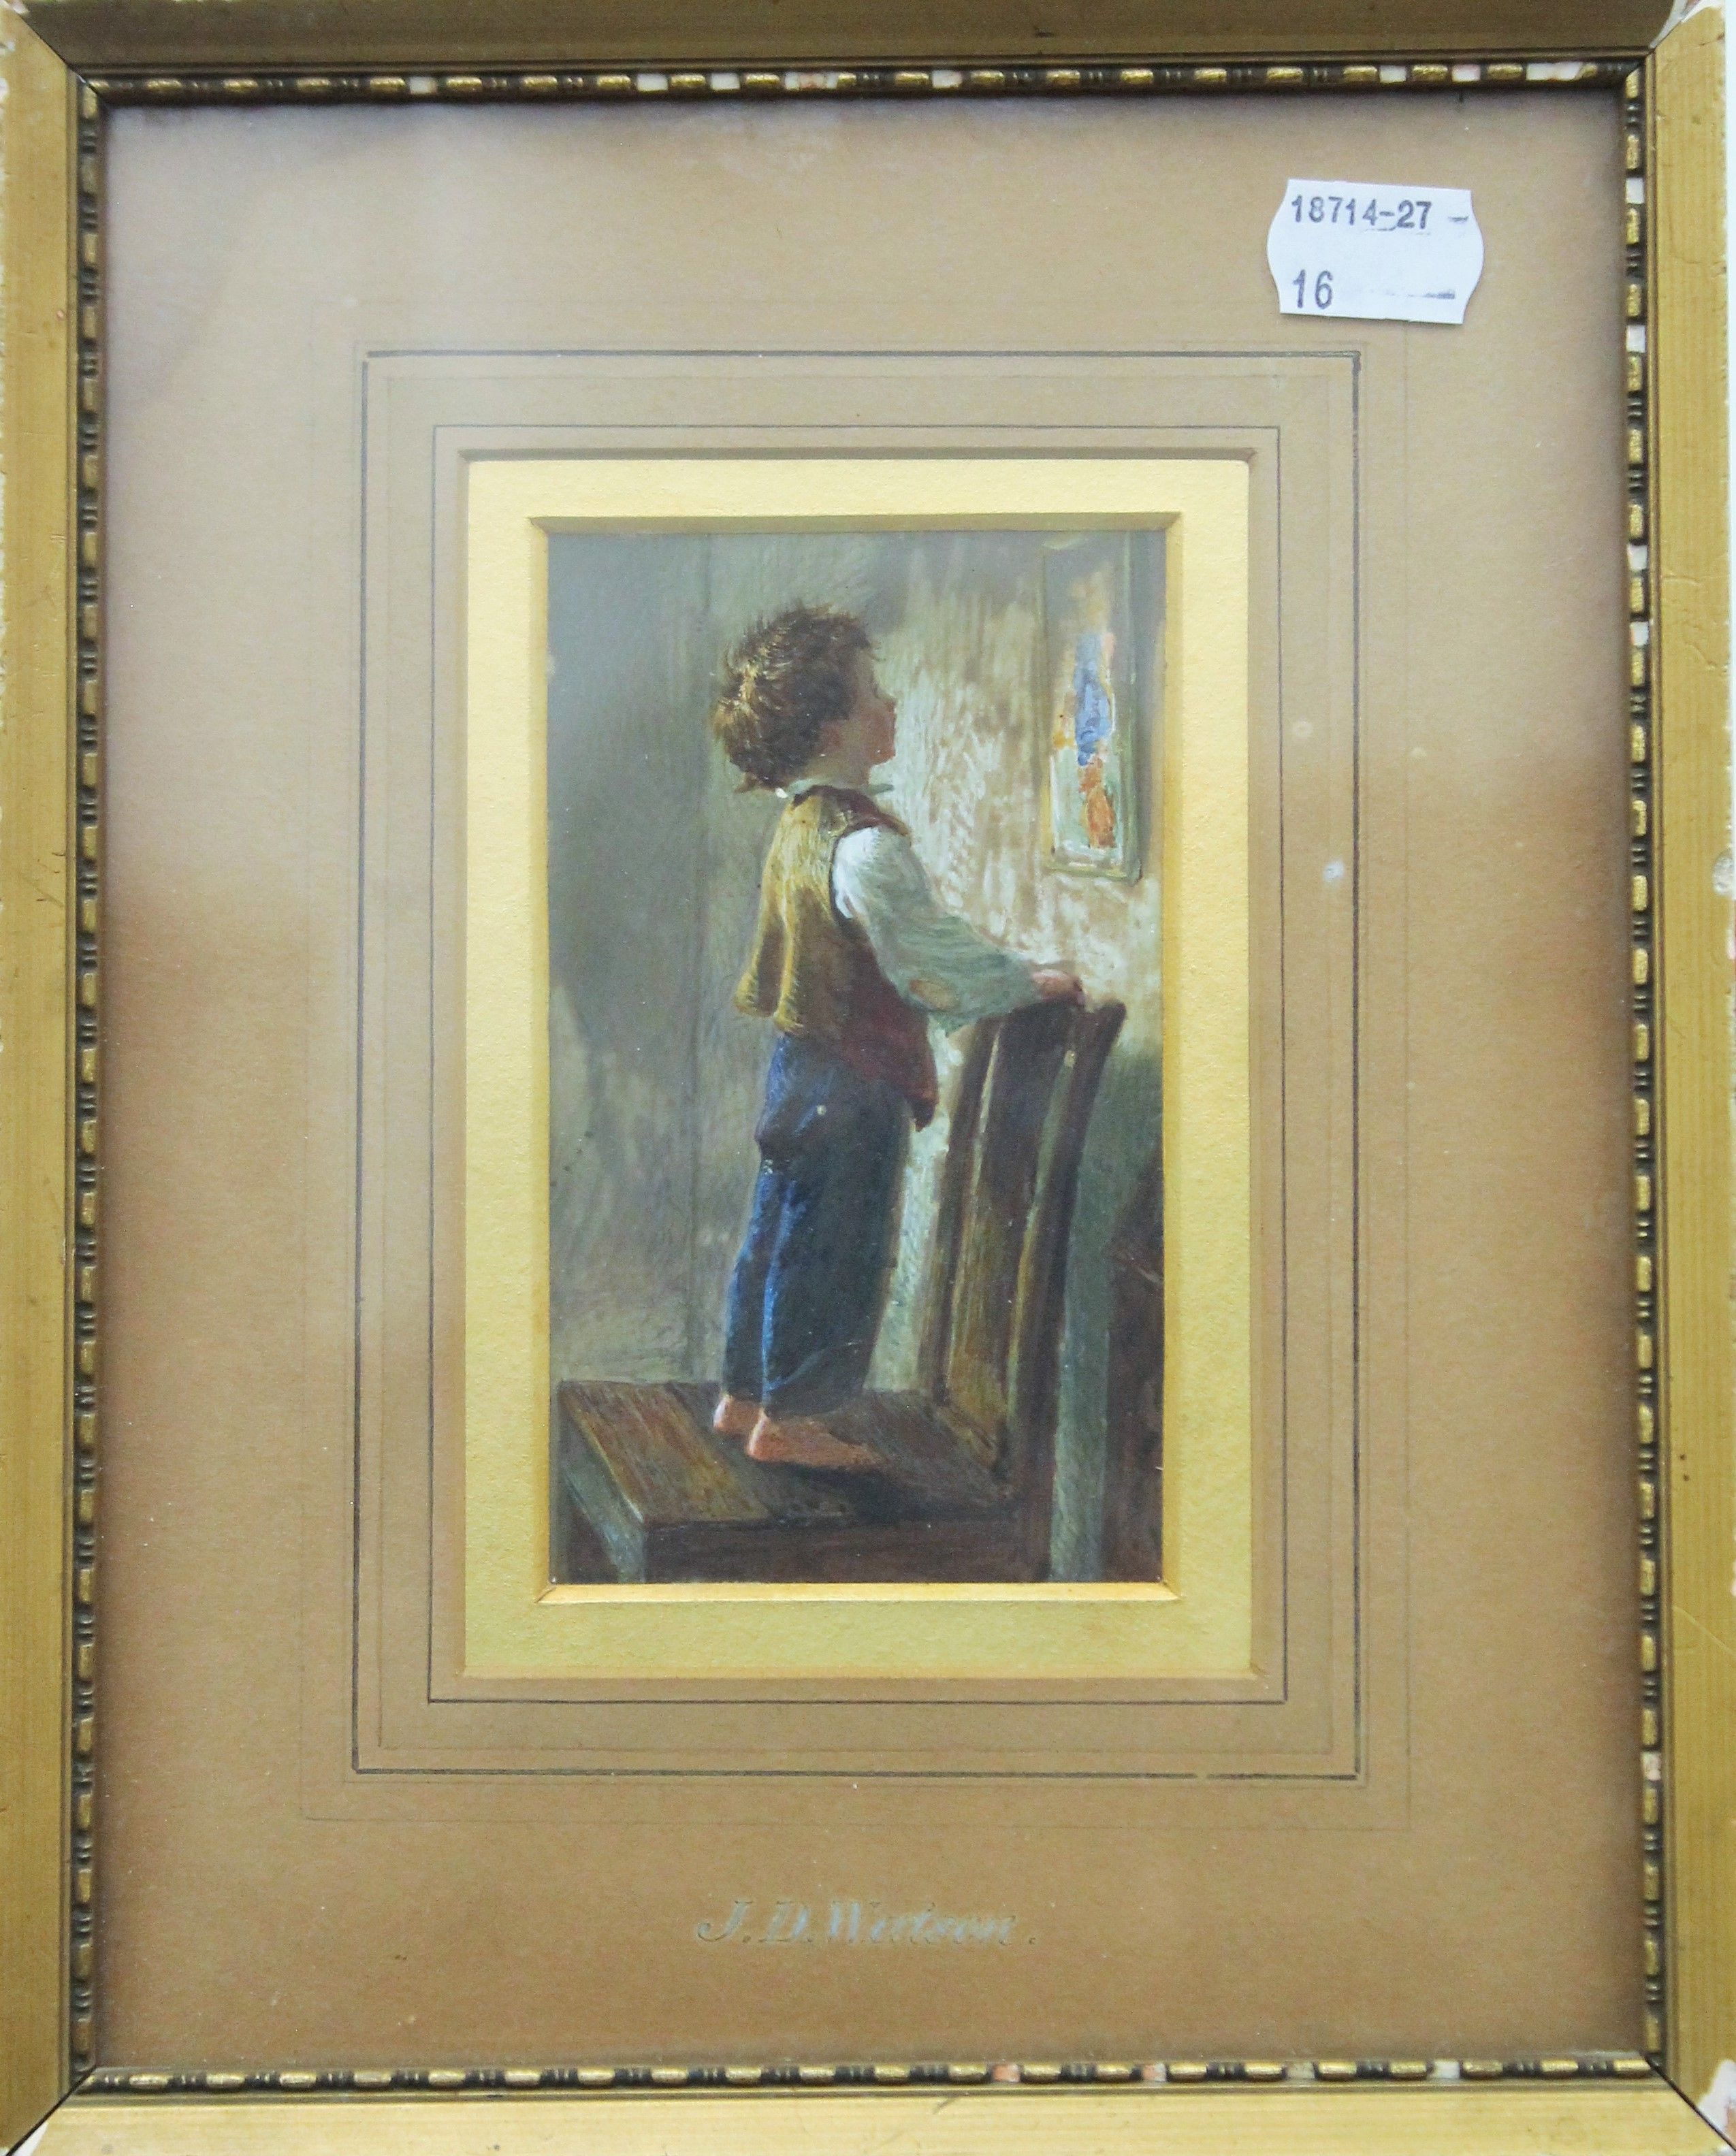 J D WATSON, Children, a pair of gouaches, each framed and glazed. Each 7.5 x 12.5 cm. - Image 4 of 4